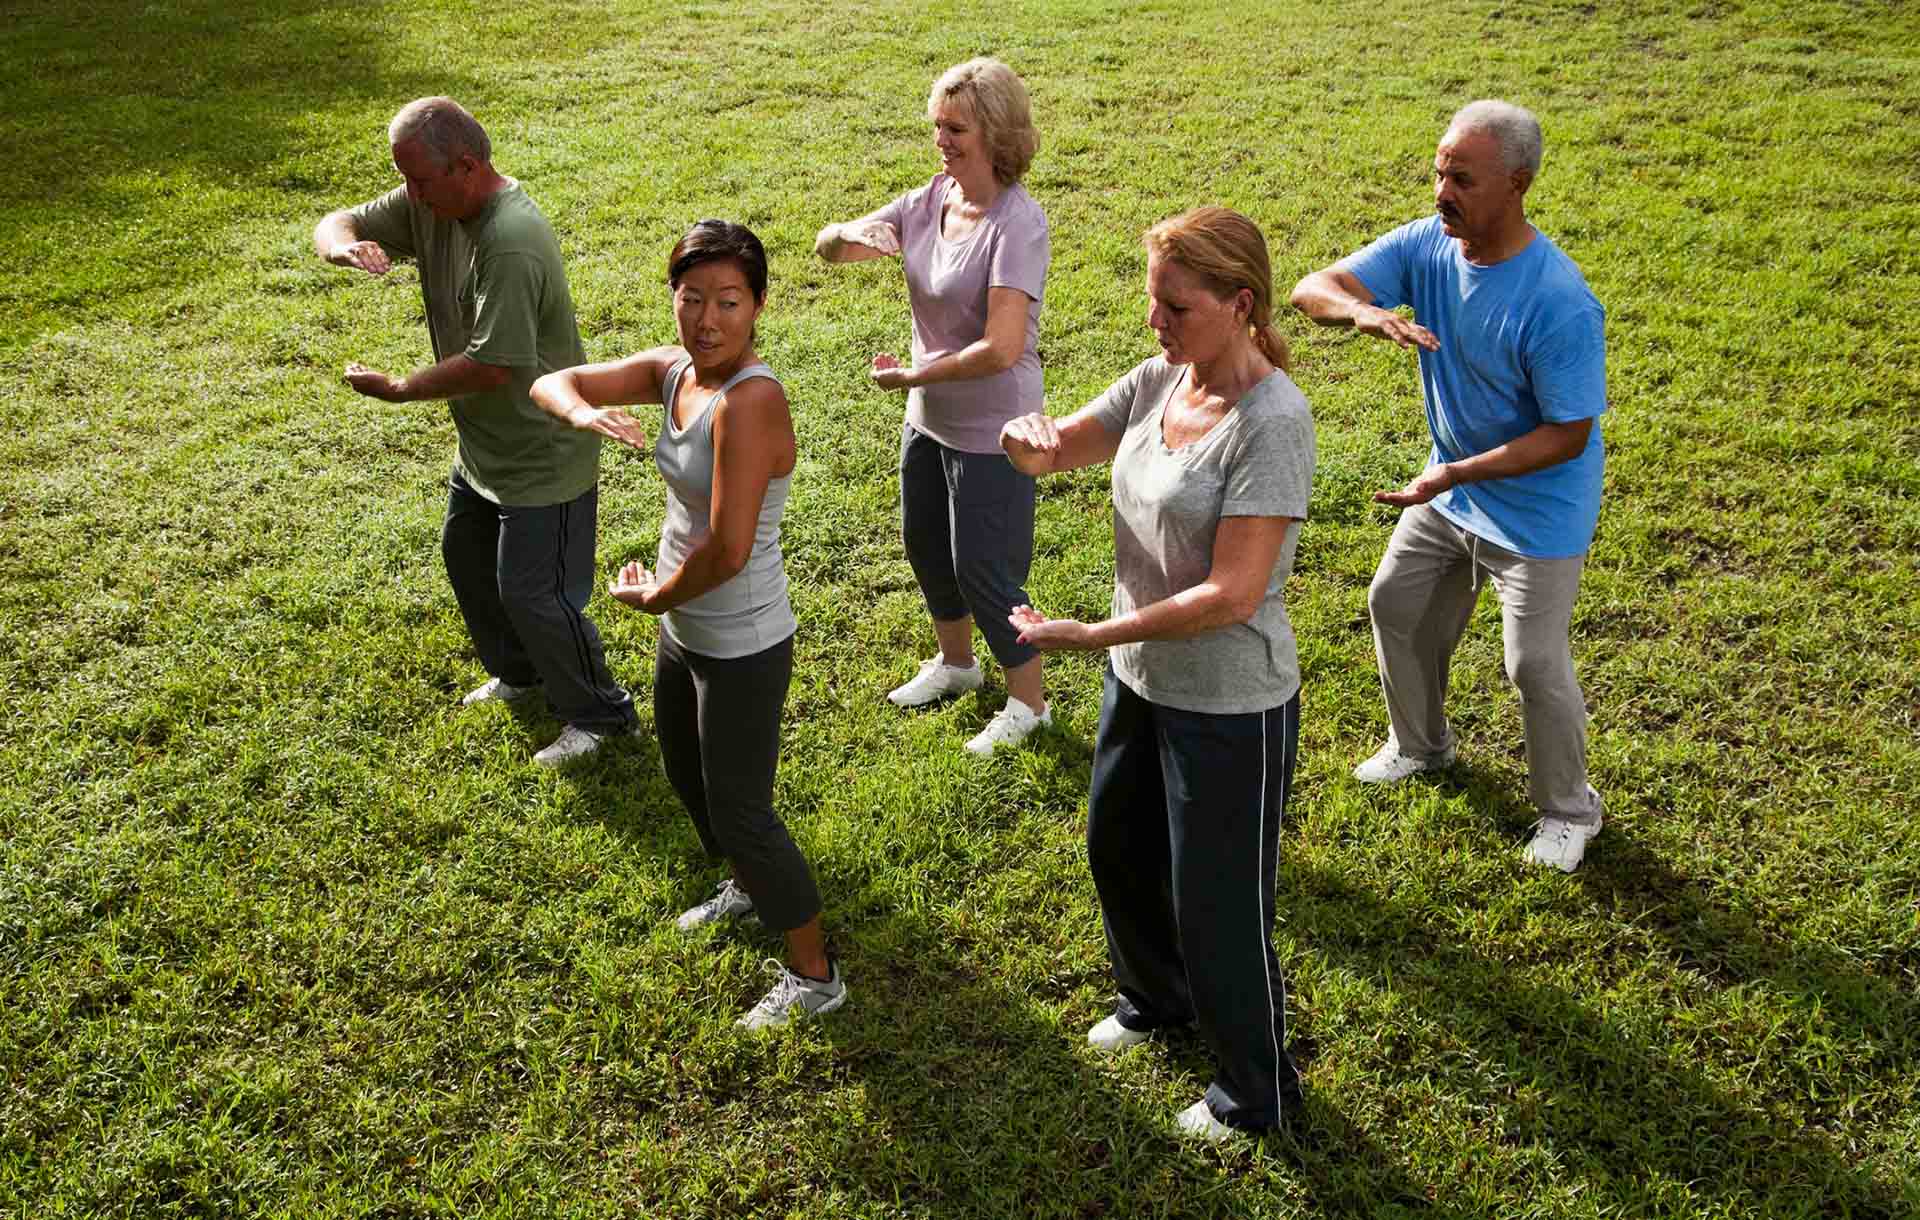 How to Practice Tai Chi: 4 Poses to Get You Started - The New York